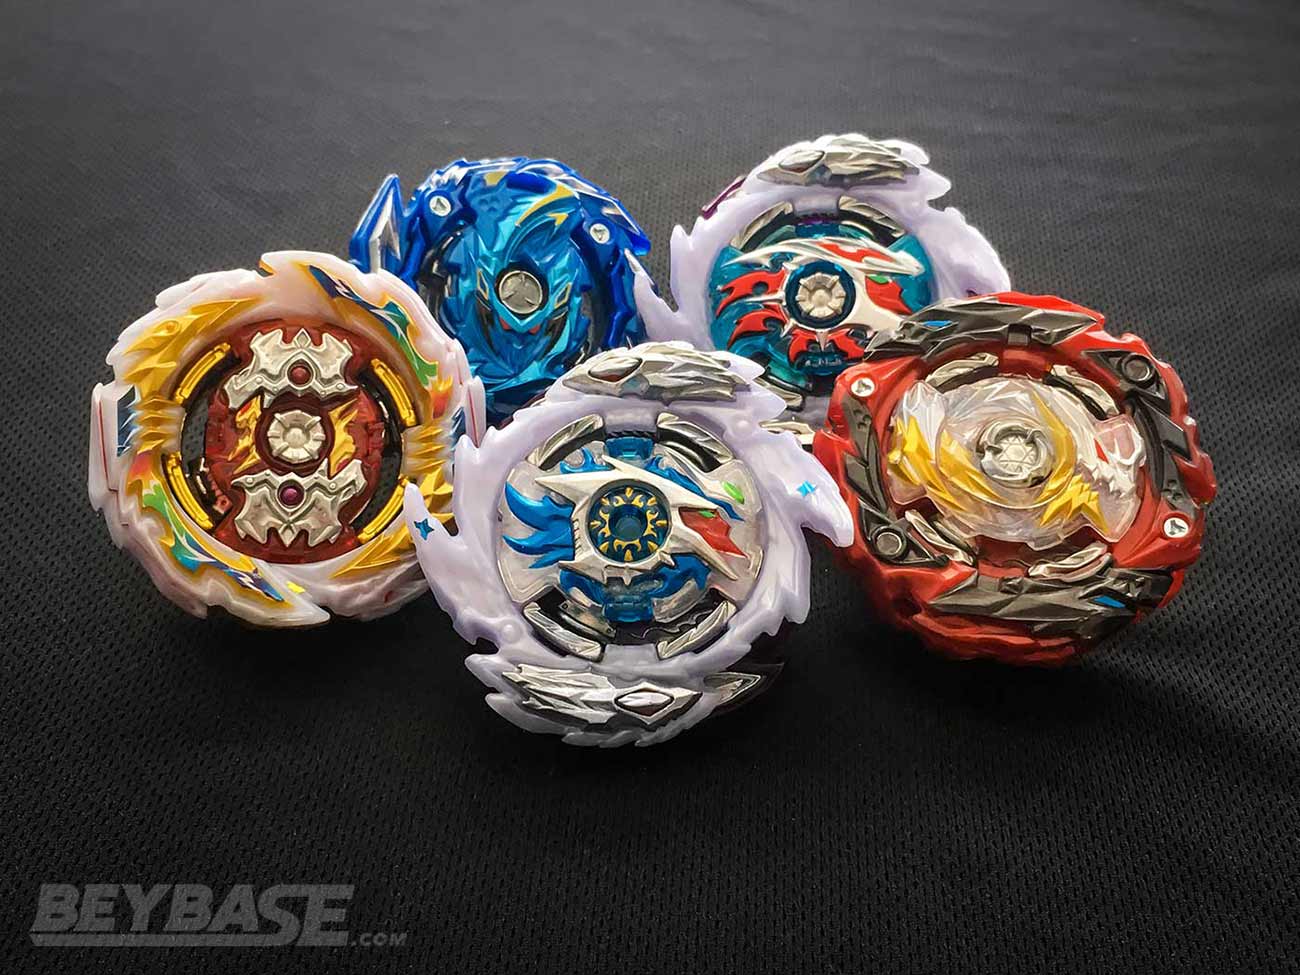 The Top 5 Best Beyblade Burst Combos of 2021 (Selected by Players & Organizers) | BeyBase